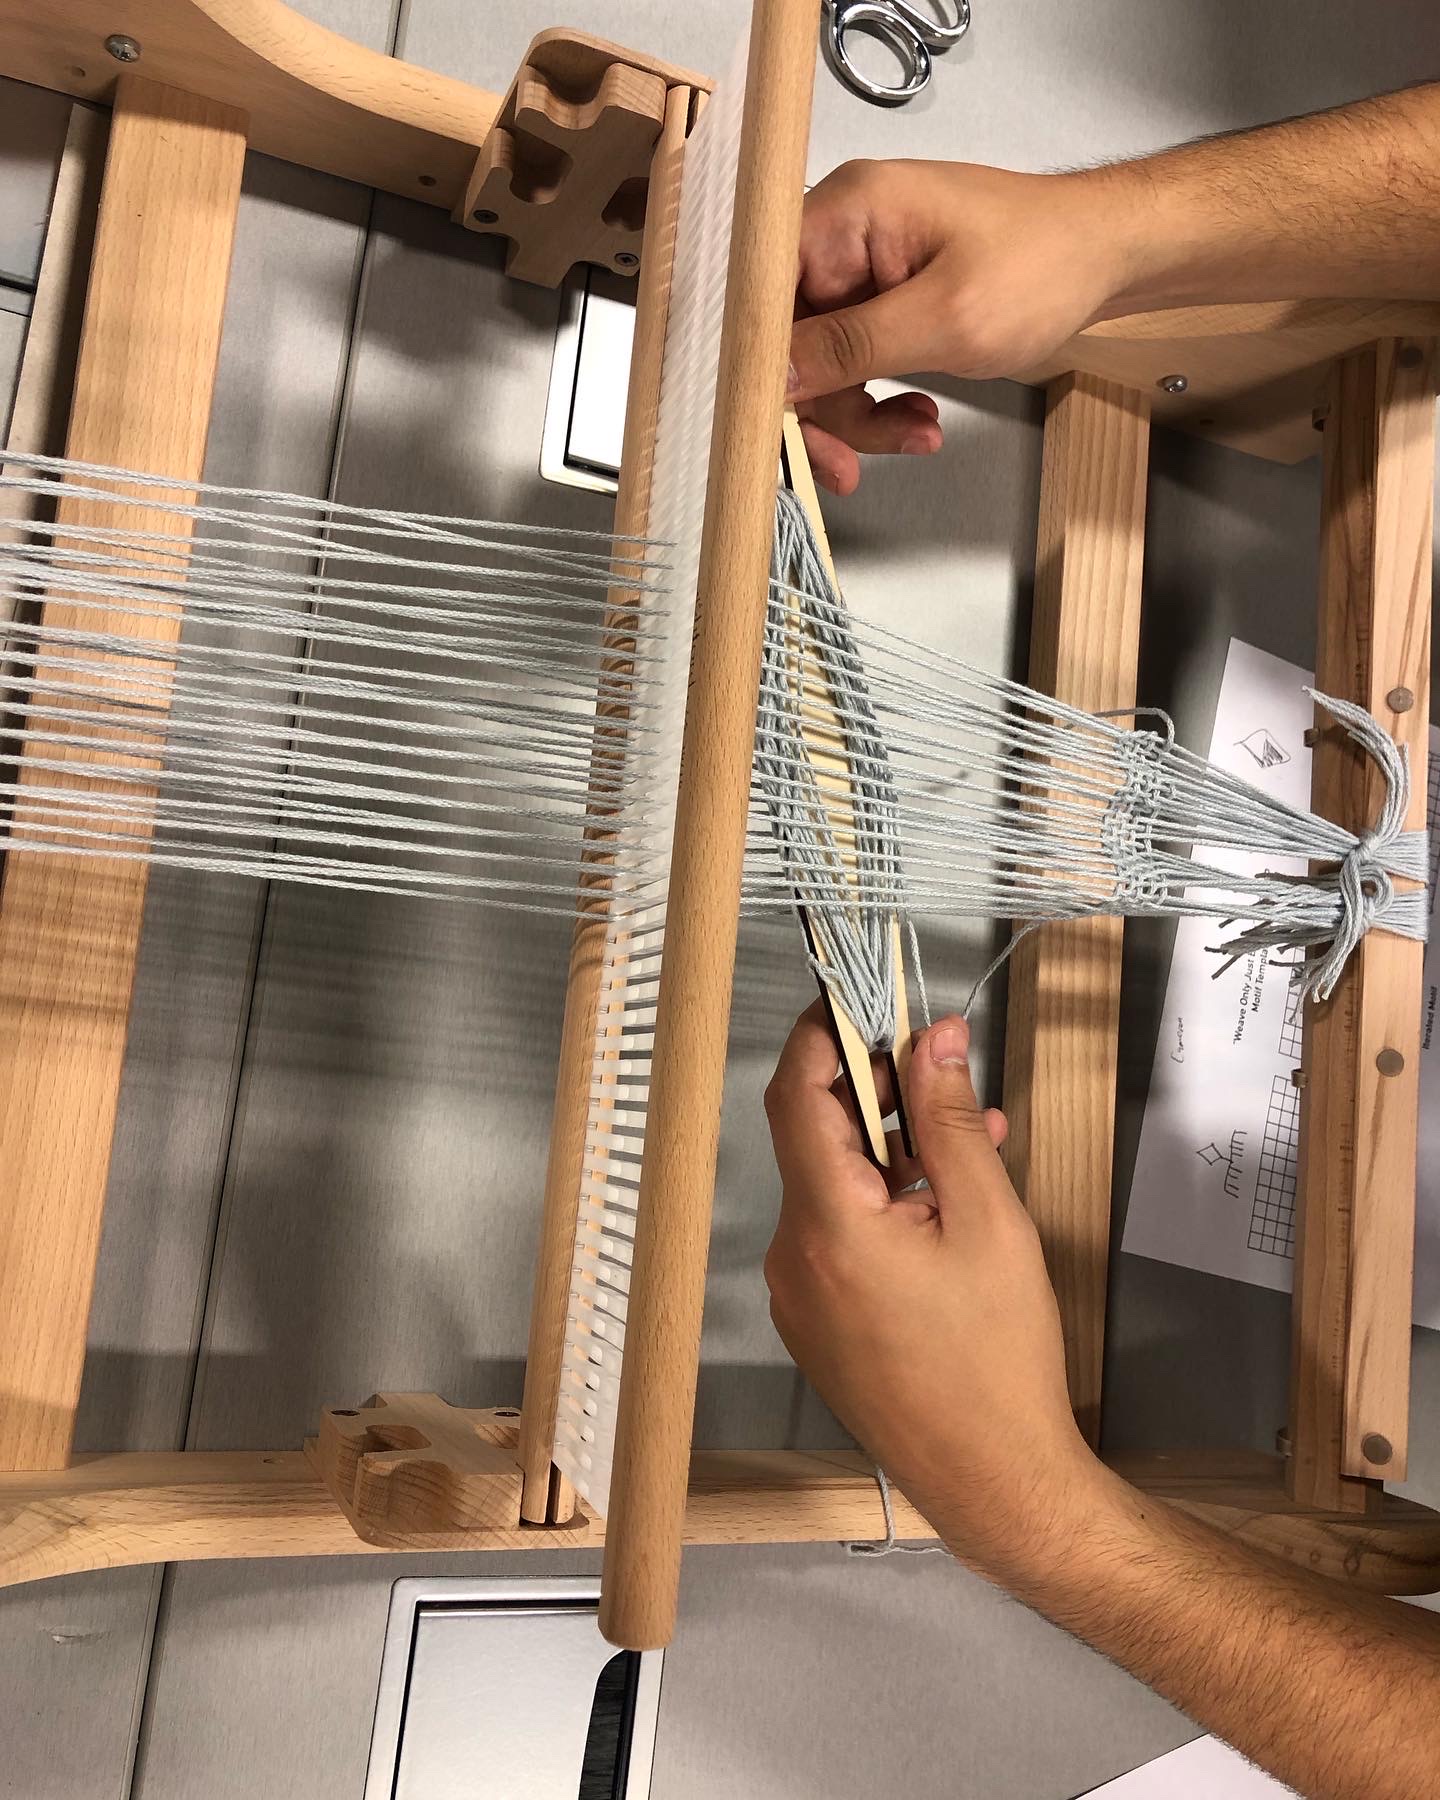 Hands guide the shuttle through the warp of the heddle loom